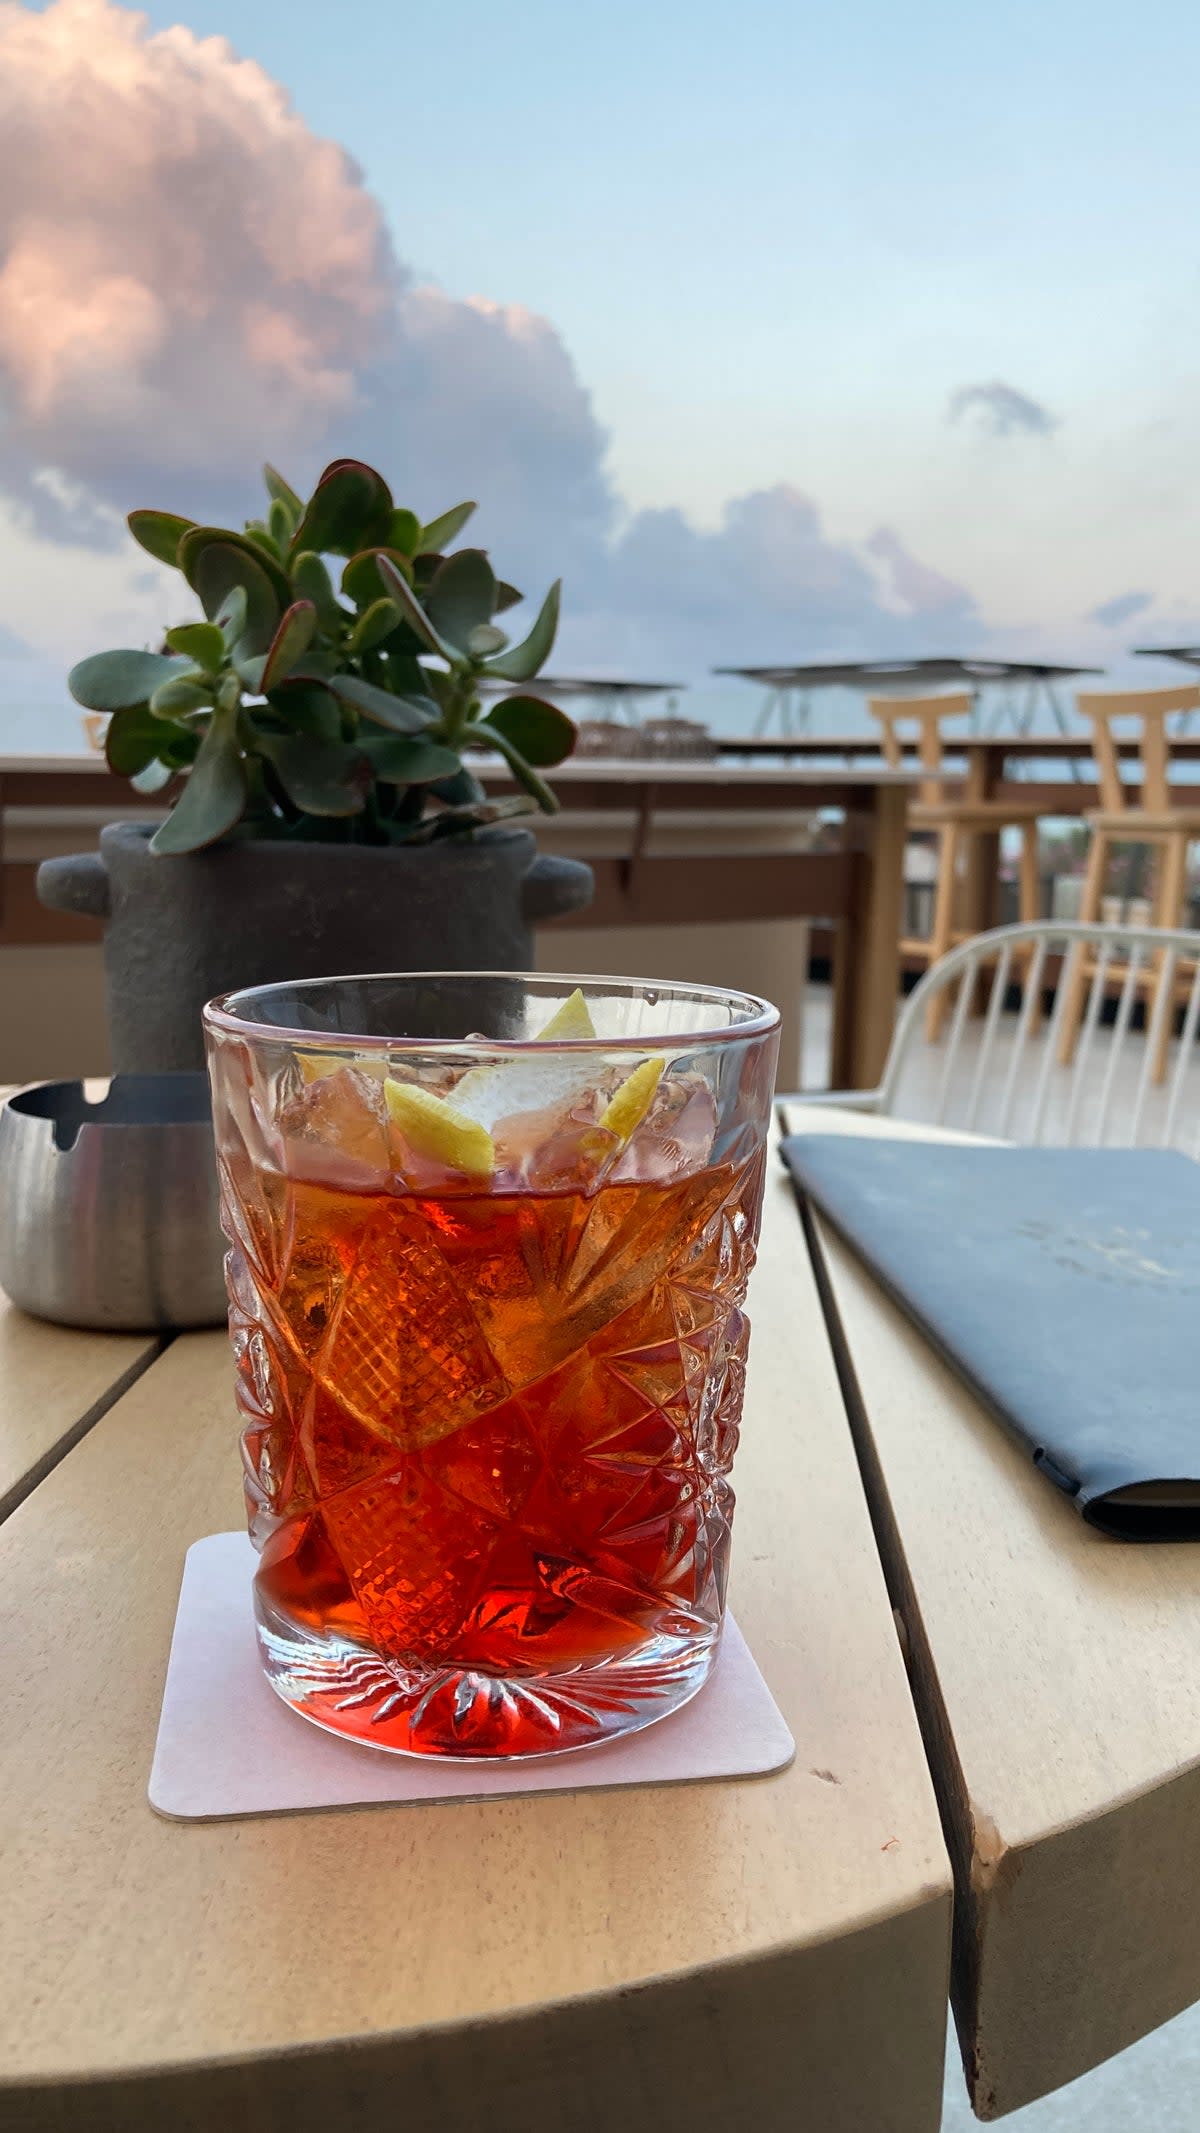 Sunset and a negroni – not a bad way to end a day in Crete (Ben Parker)